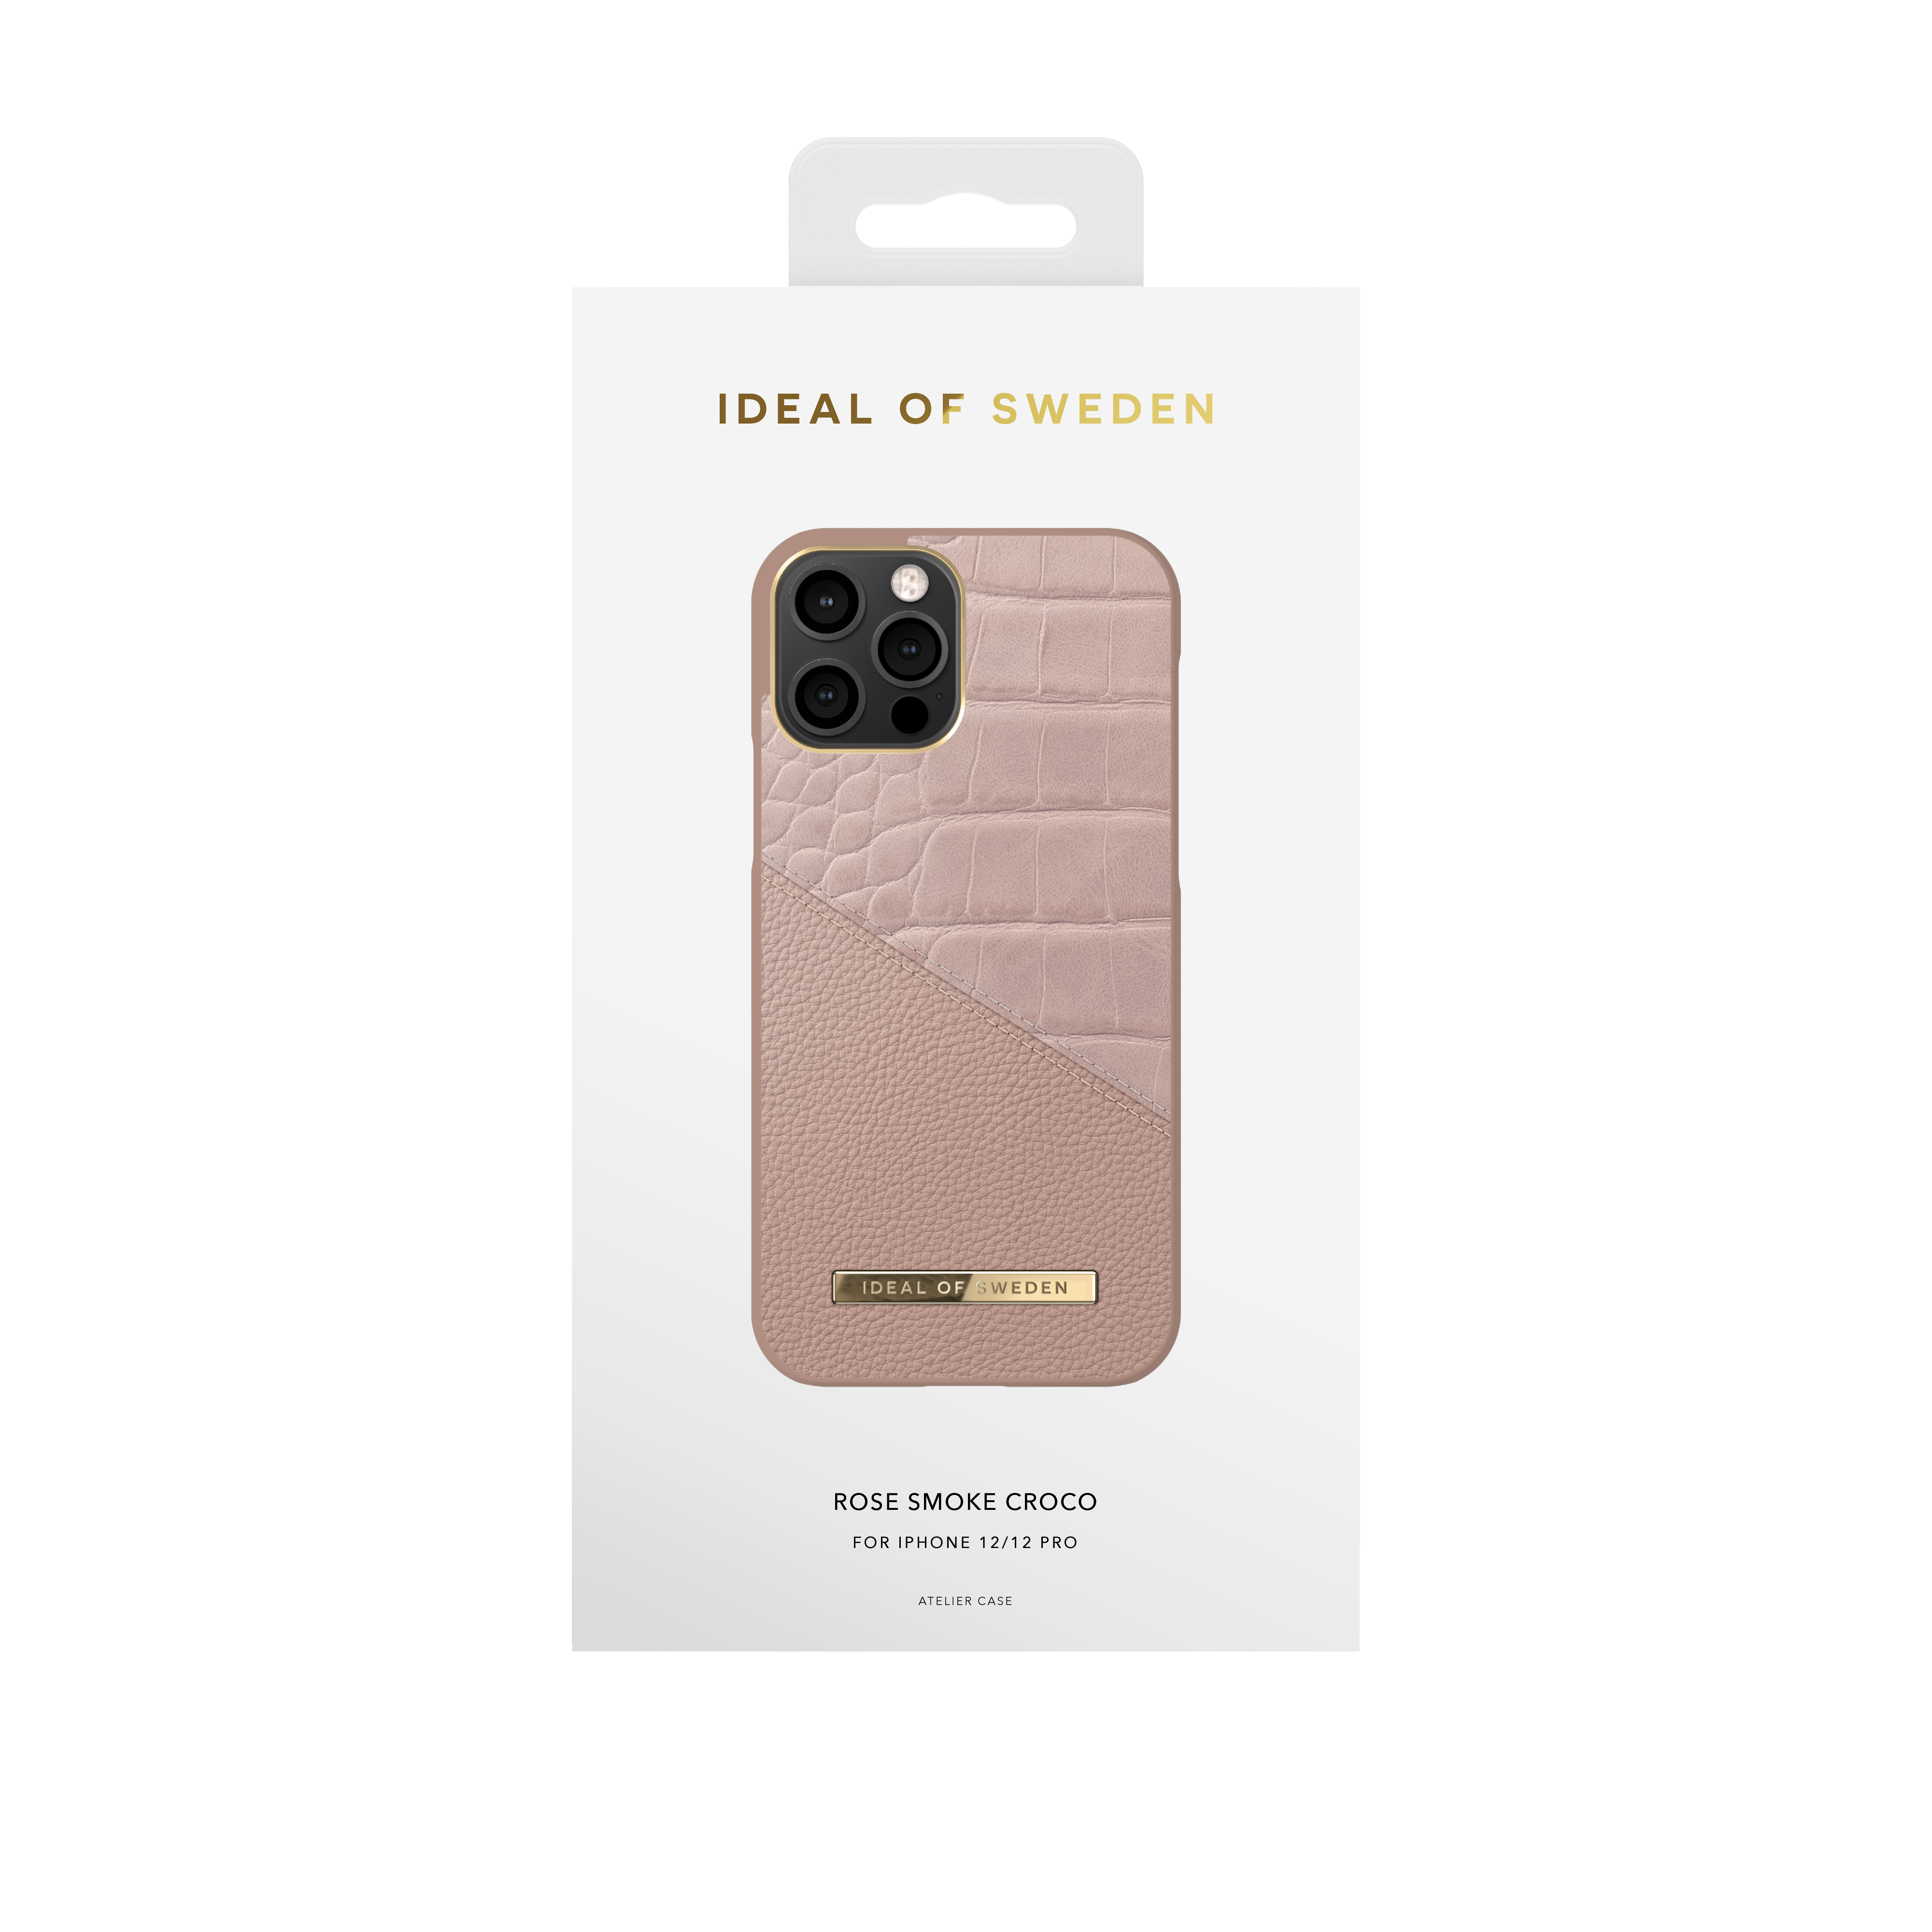 IDEAL OF SWEDEN IDACSS20-I2061-202, Smoke Pro, Rose Croco 12, Apple, iPhone iPhone Backcover, 12